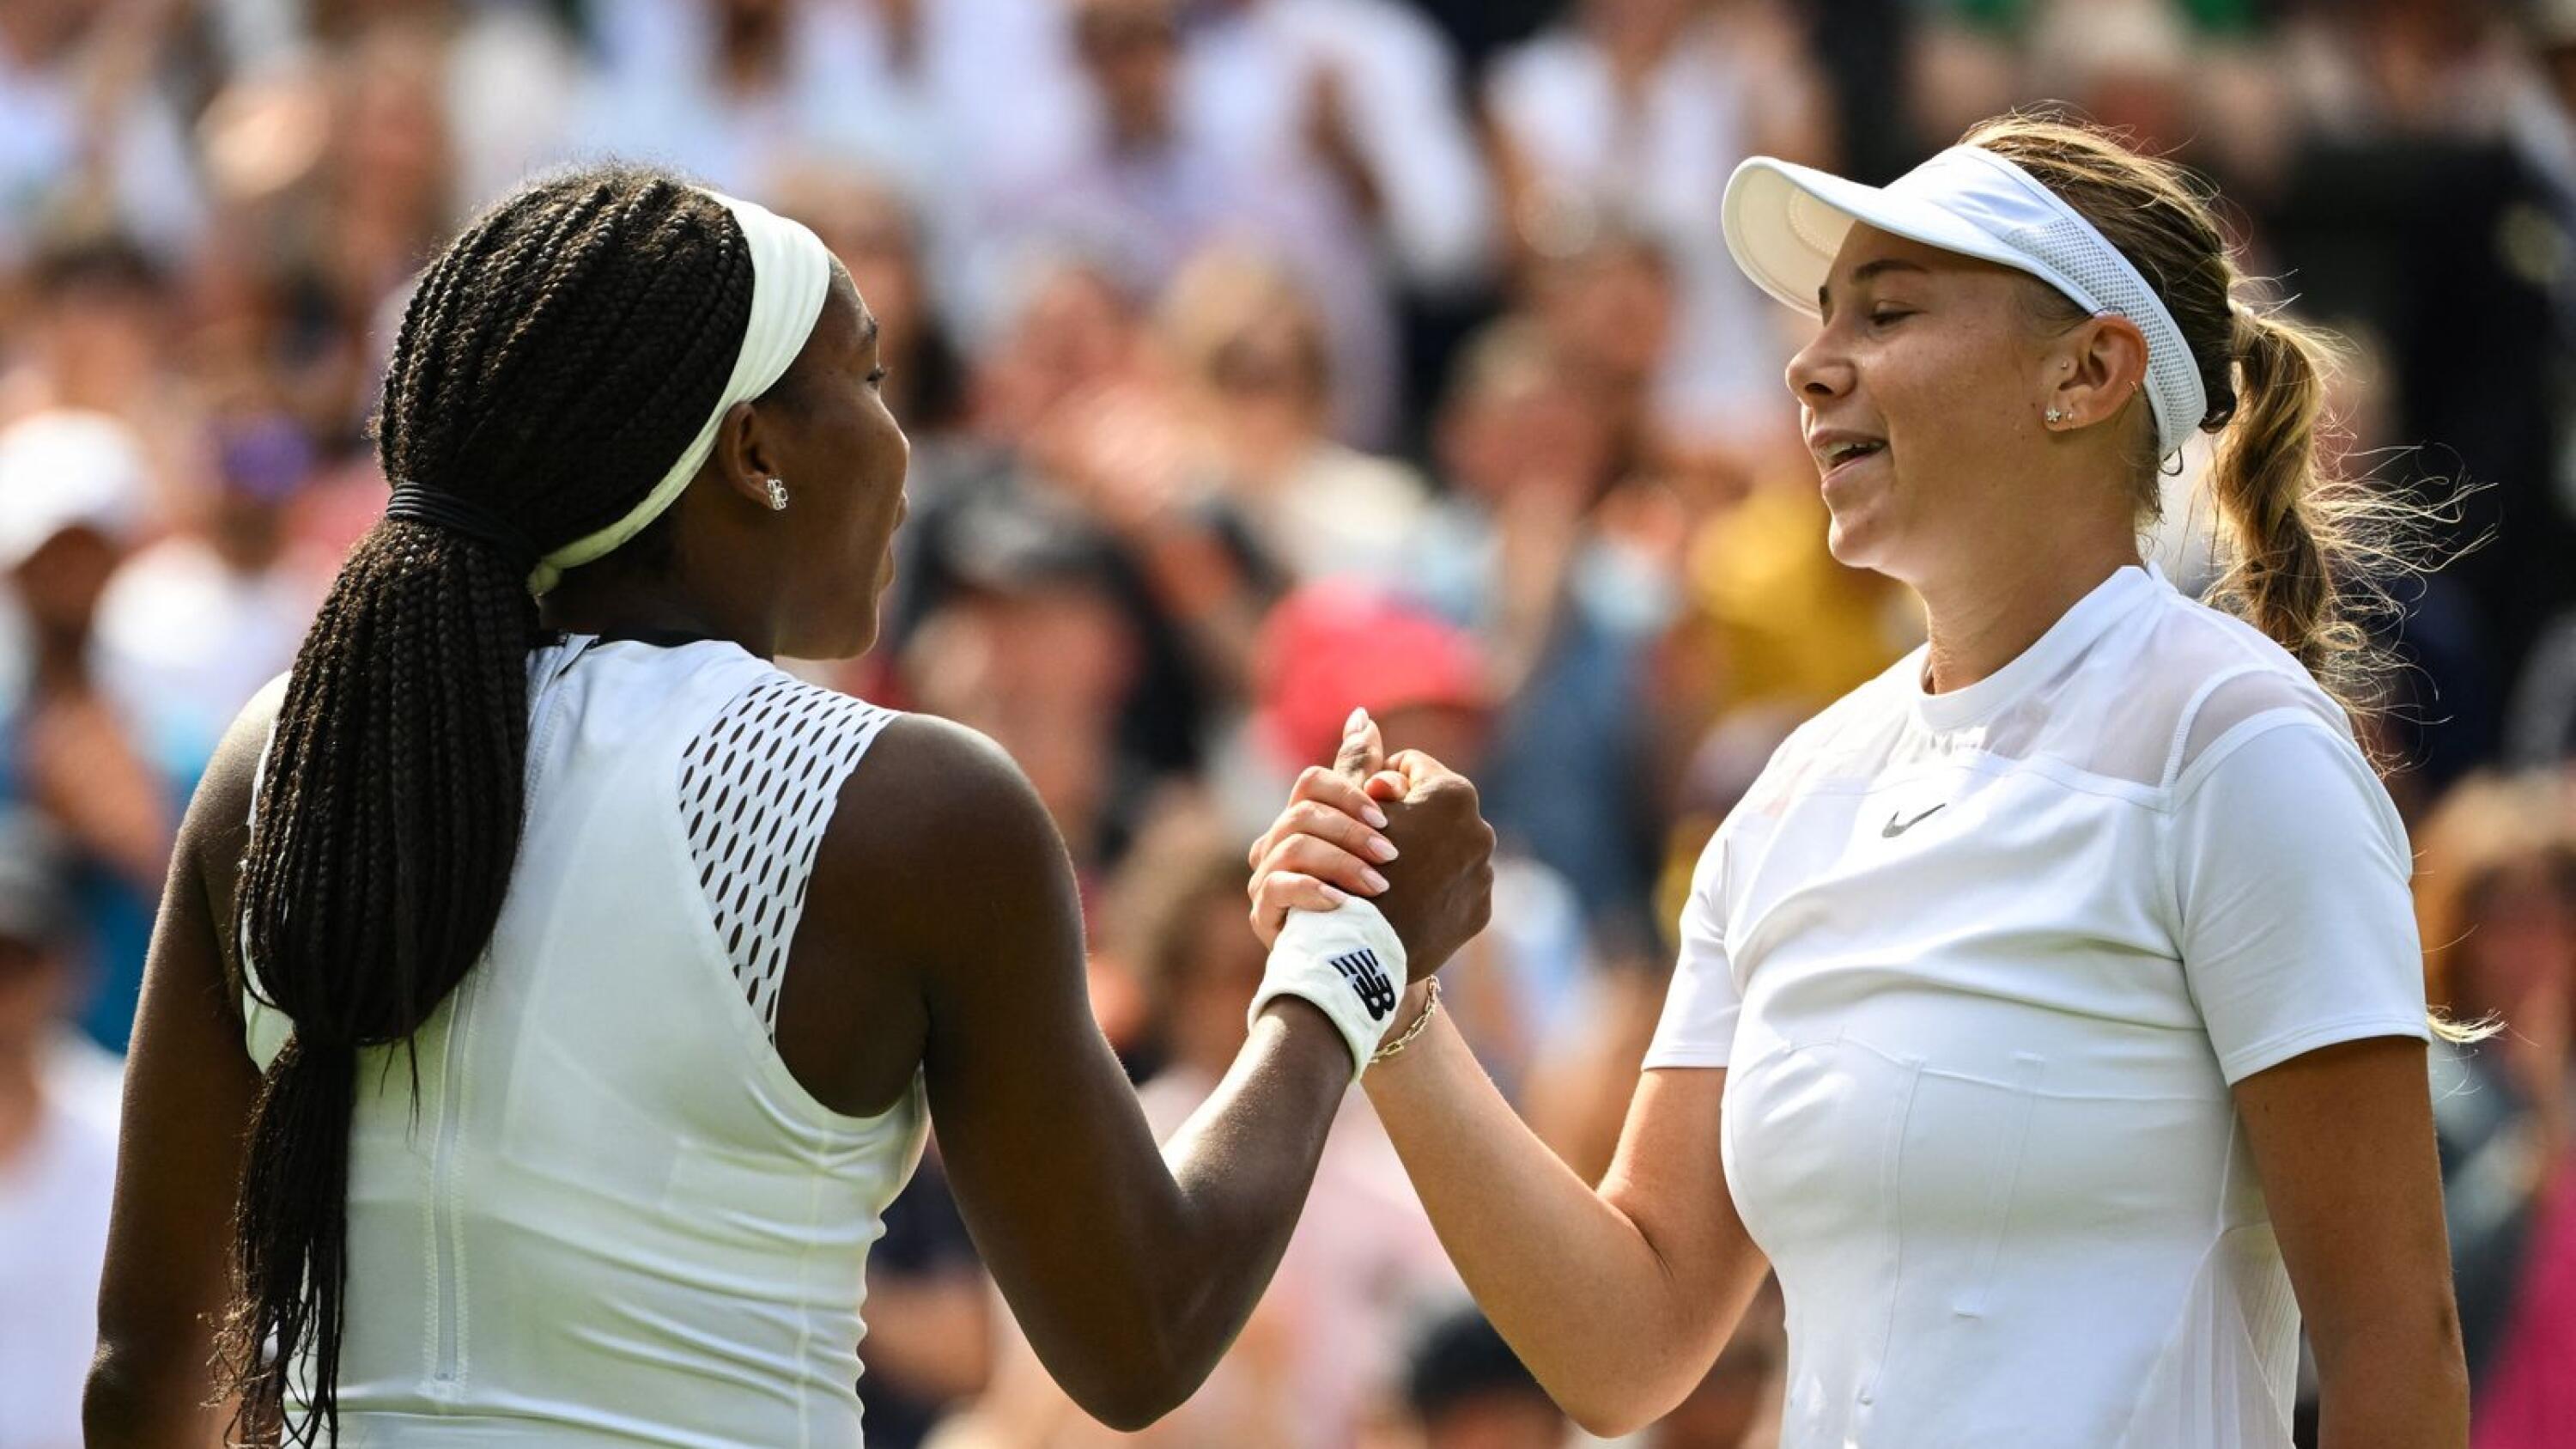 Amanda Anisimova (R) shakes hands with compatriot Coco Gauff after winning at the end of their women's singles tennis match on the sixth day of the 2022 Wimbledon Championships at The All England Tennis Club in Wimbledon, southwest London, on Saturday